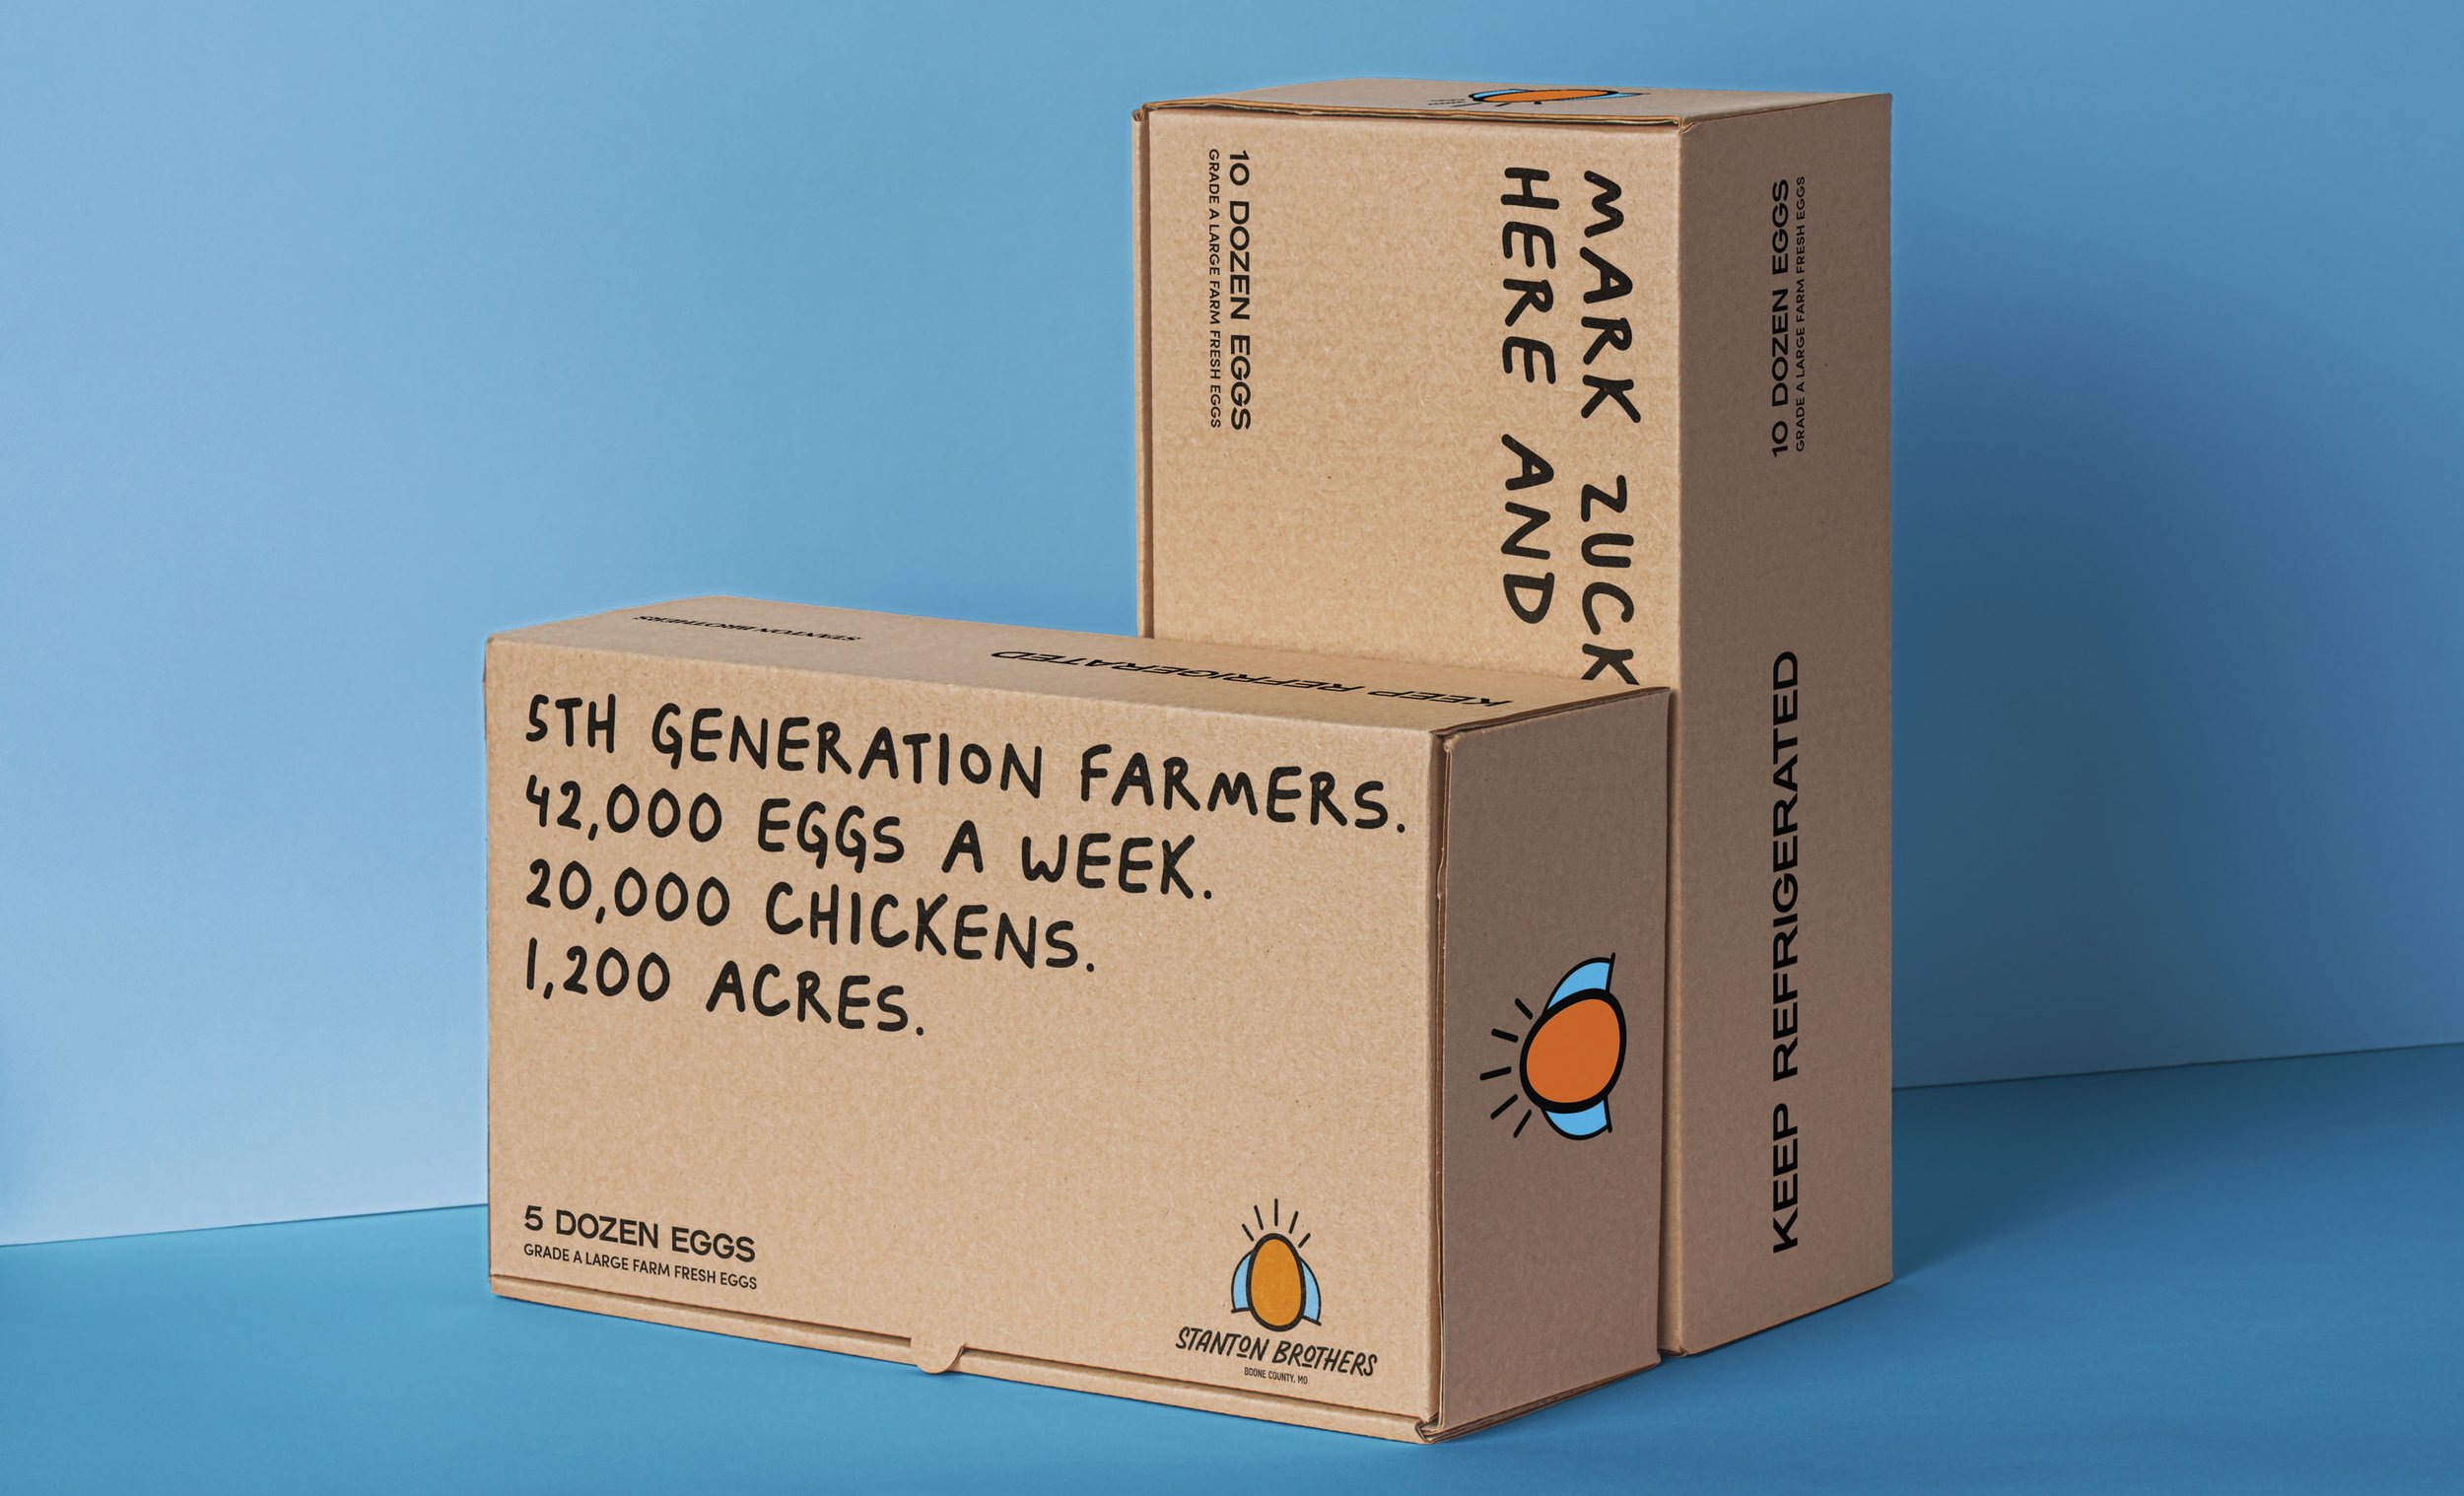  Stanton Brothers shipping boxes with branded messaging. 